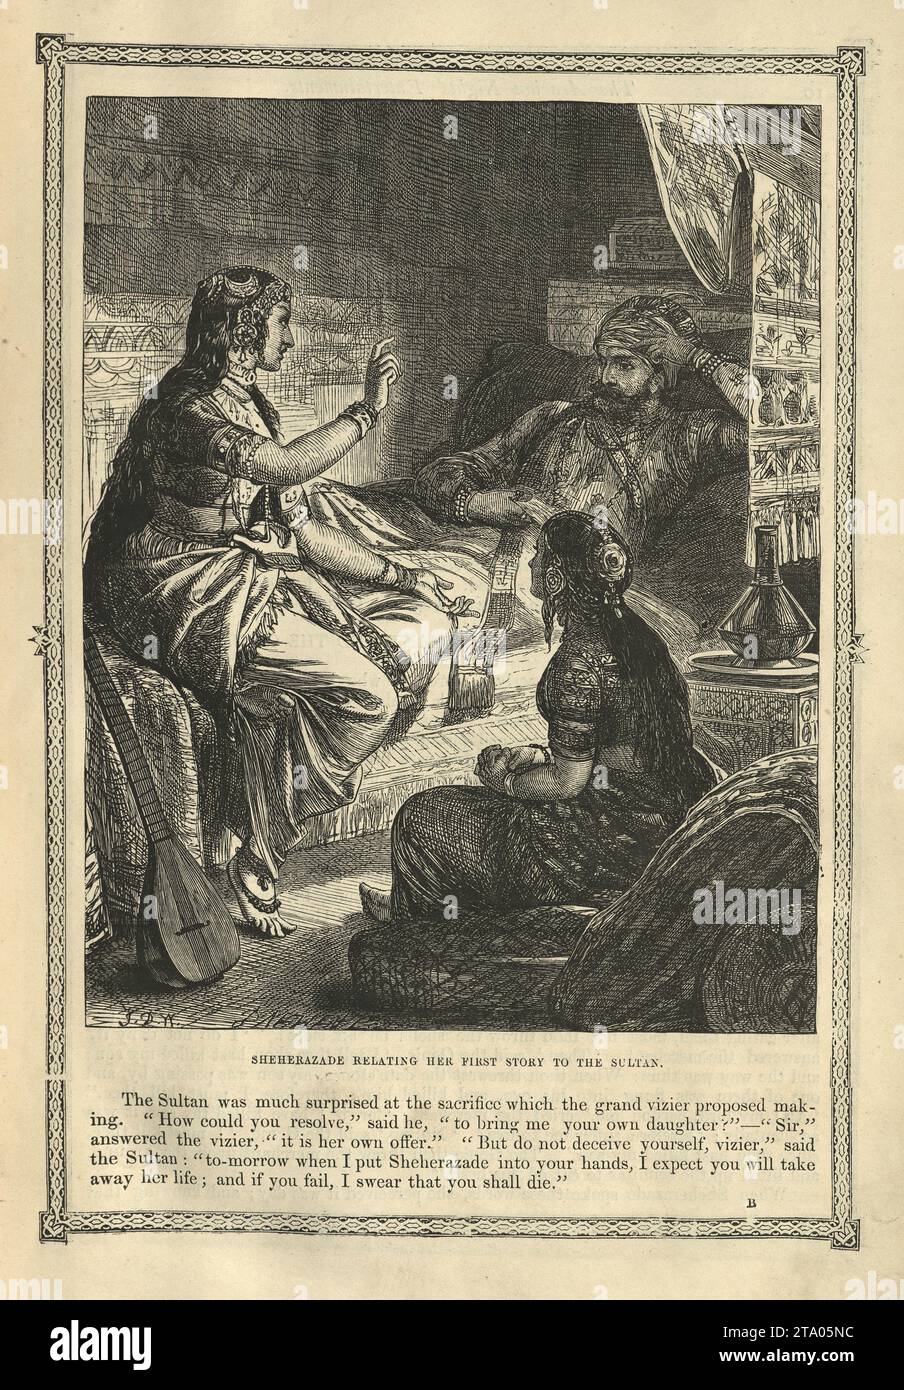 Vintage illustration One Thousand and One Nights, Scheherazade relating her first story to the Sultan, Arabian, Middle Eastern folktales, by The Brothers Dalziel Stock Photo